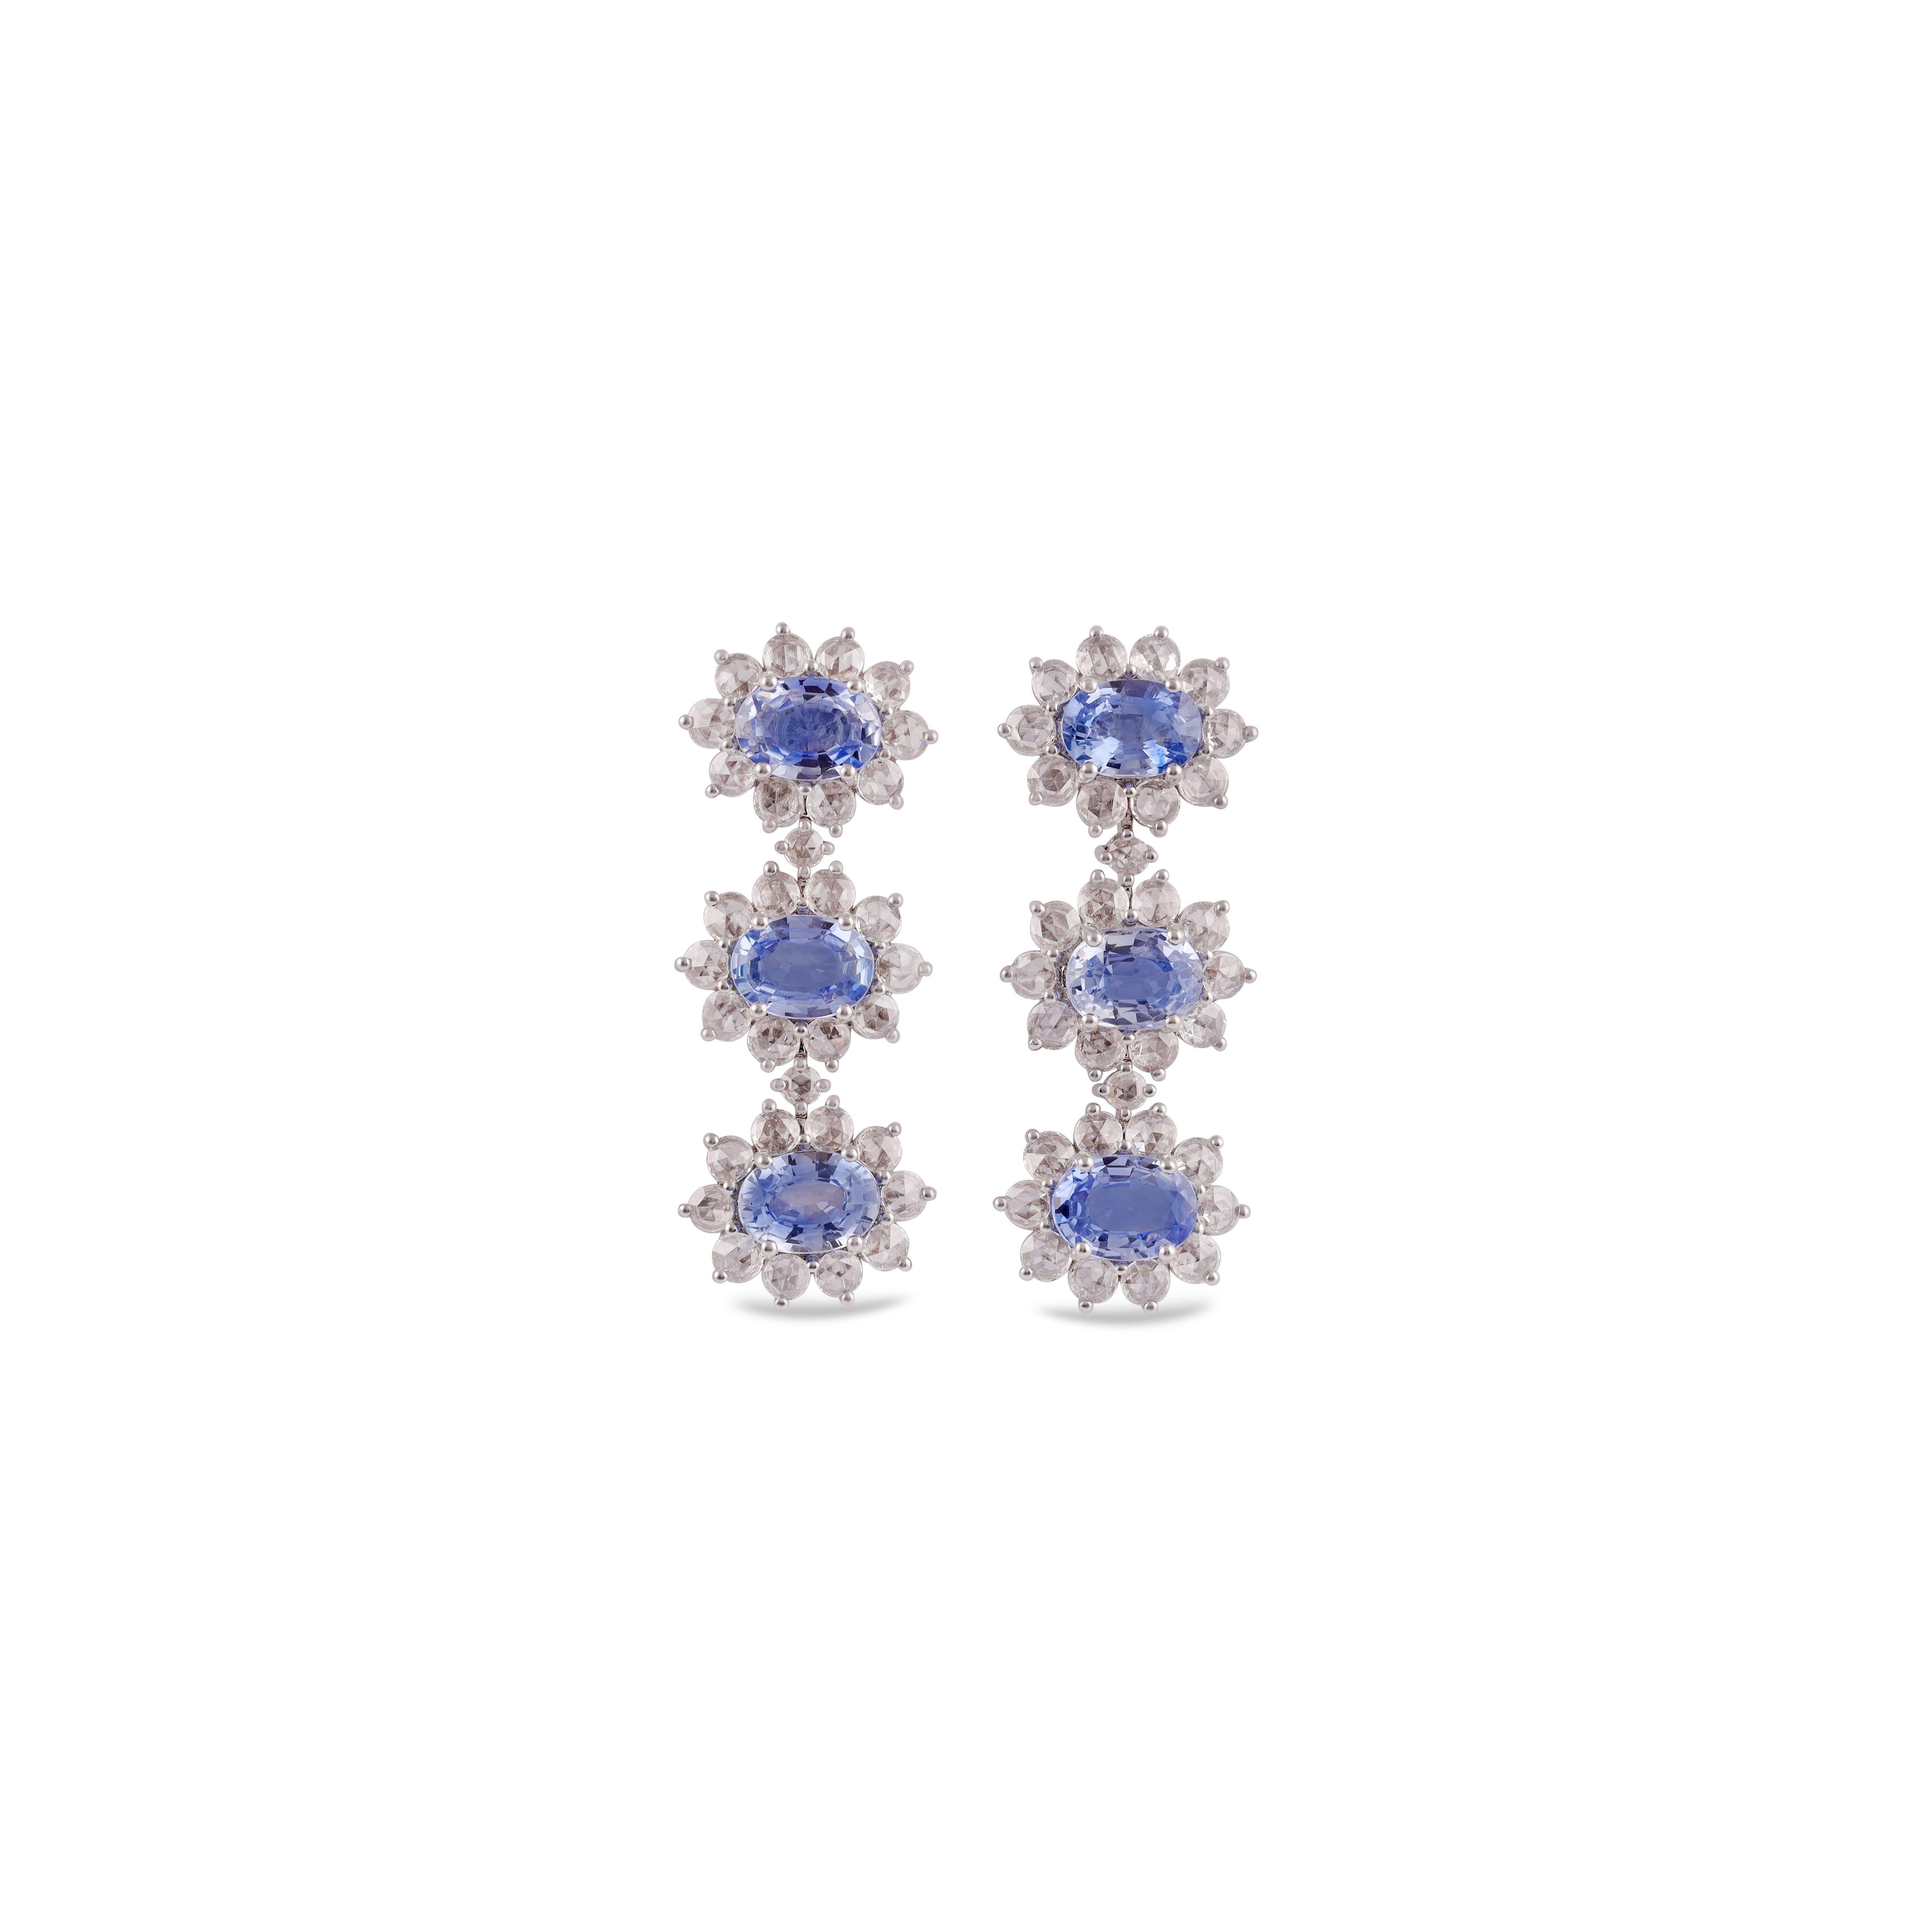 These are an exclusive earrings with Blue sapphire & diamonds features 6 pieces of Sapphire weight 5.24 carats, surrounded with 64 pieces of round  of diamonds weight 1.73 carats, These entire earrings are studded in 18k White gold, earrings have a